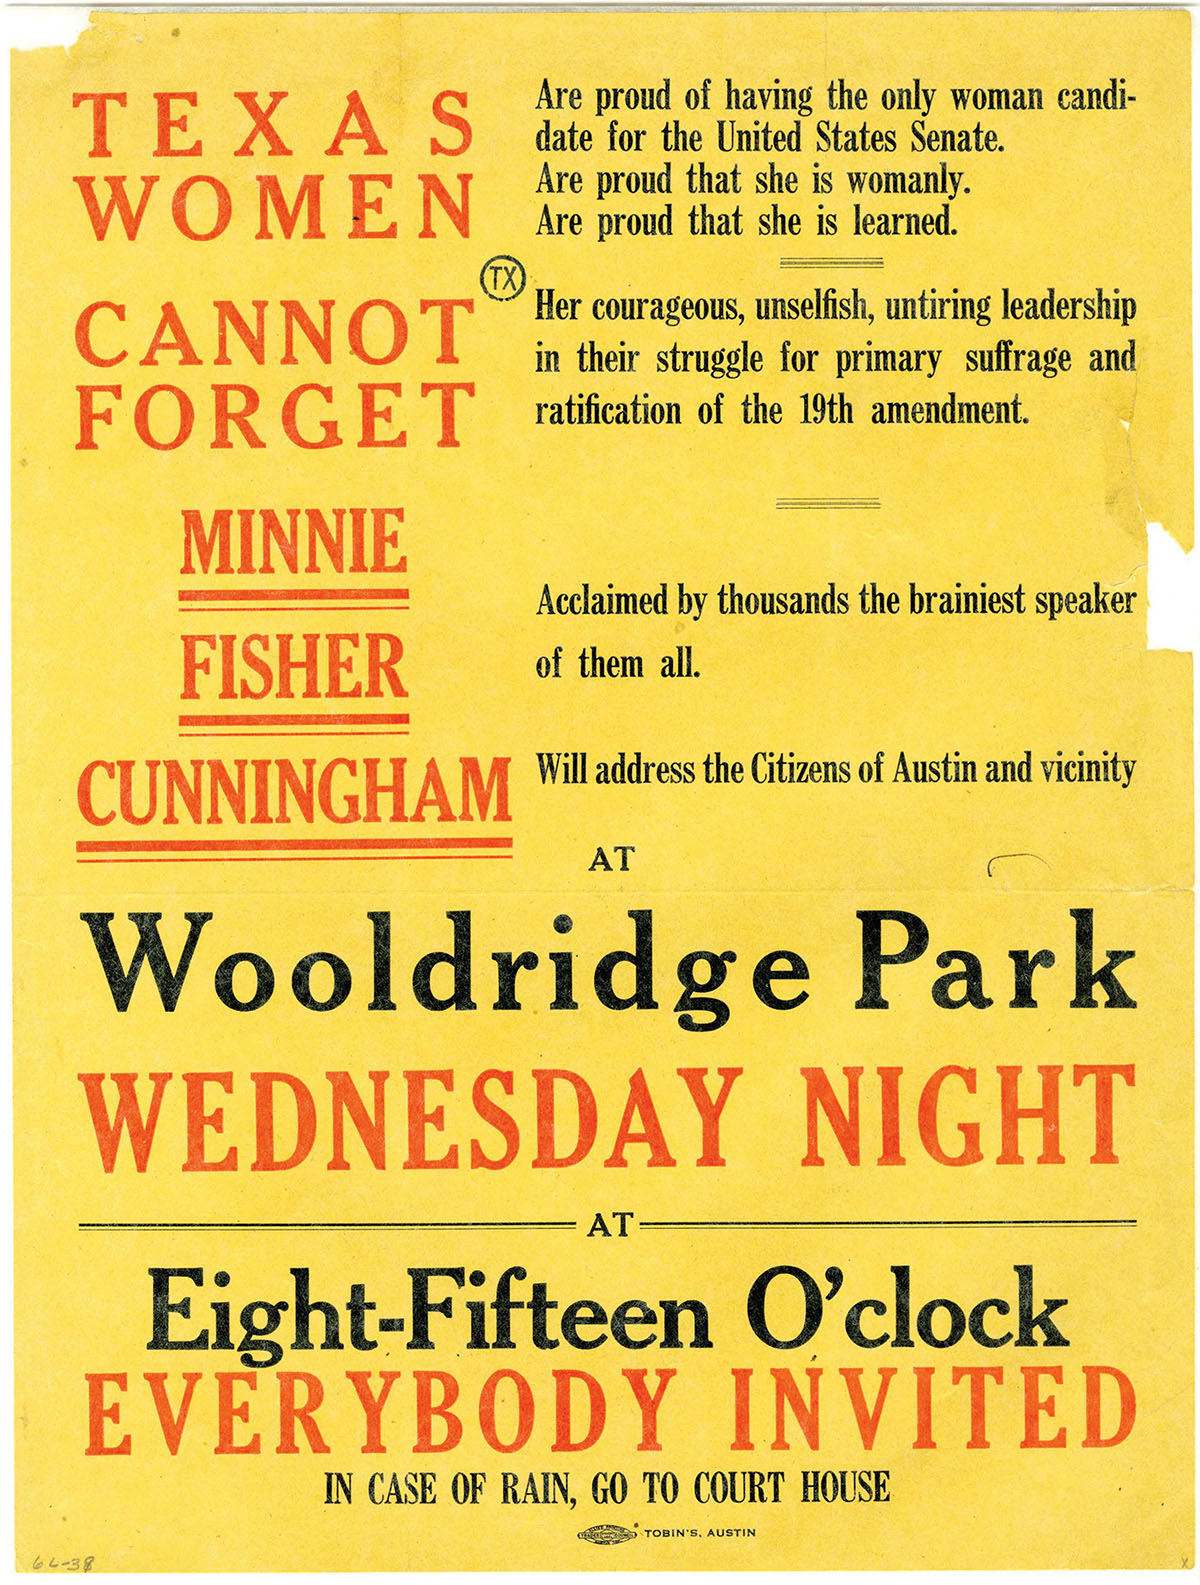 A poster titled "Texas women cannot forget Minnie Fisher Cunningham